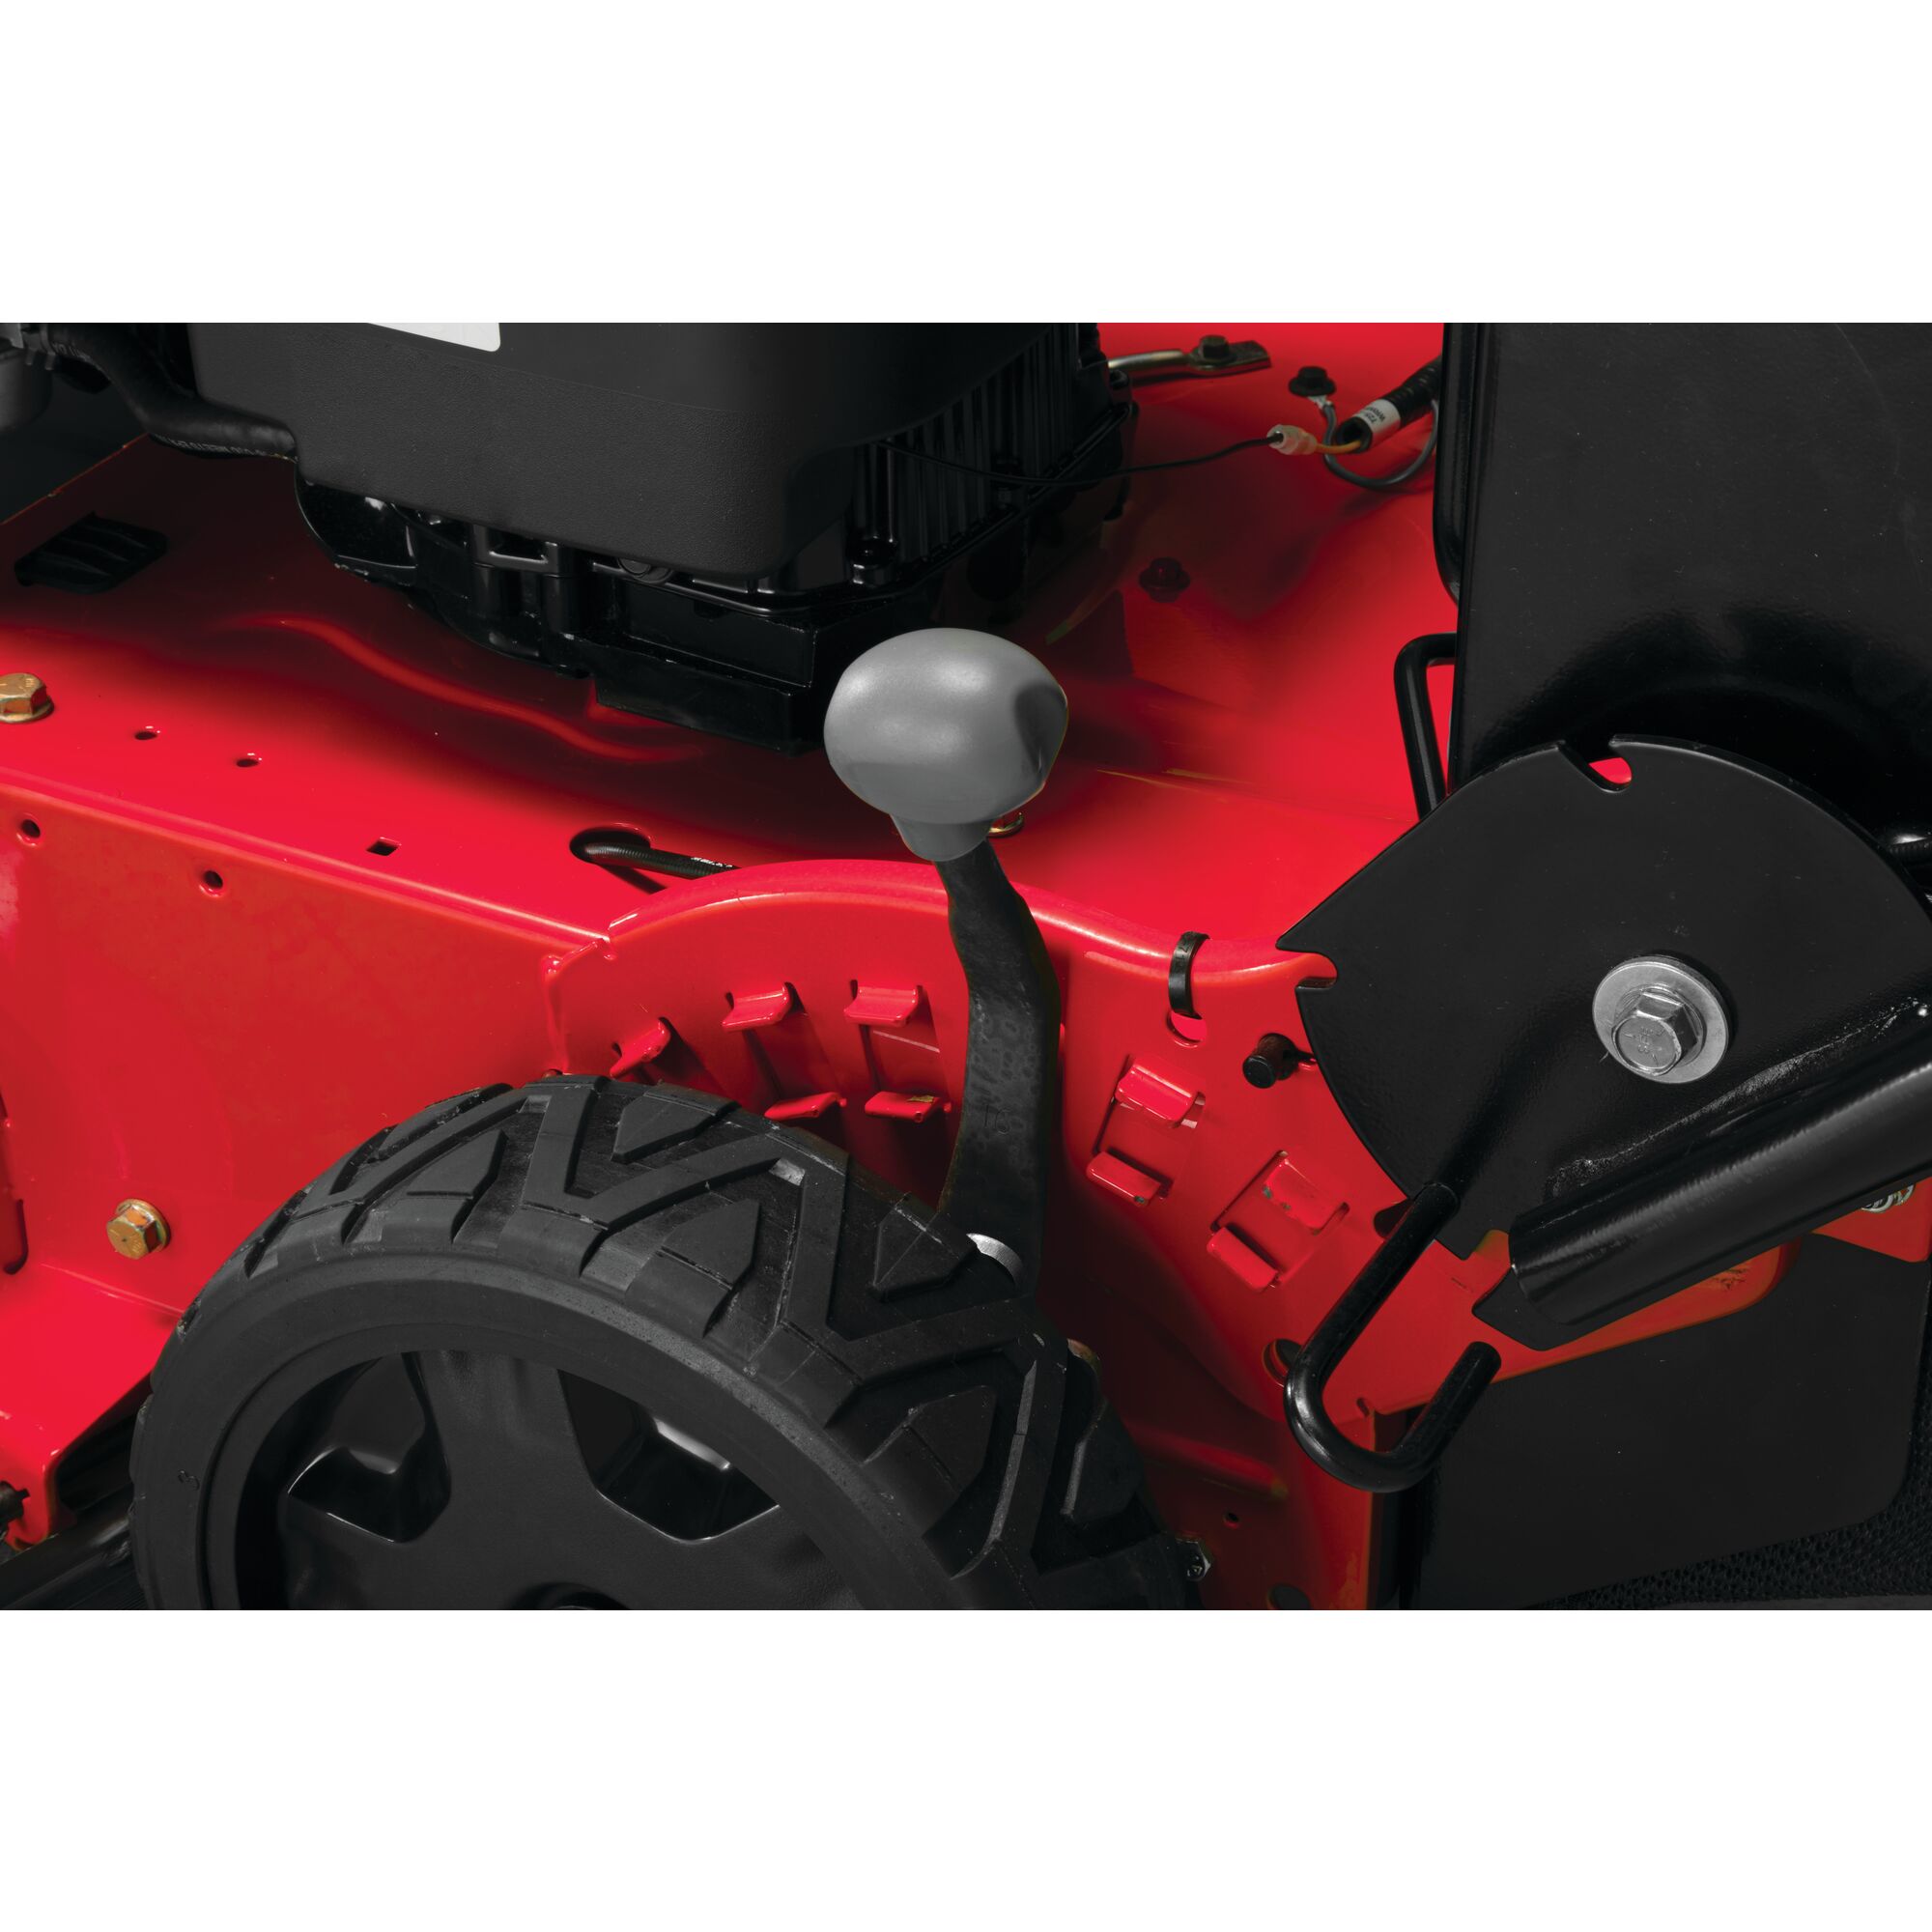 CRAFTSMAN M430 28-in. 223cc RWD Self-Propelled Mower on white background